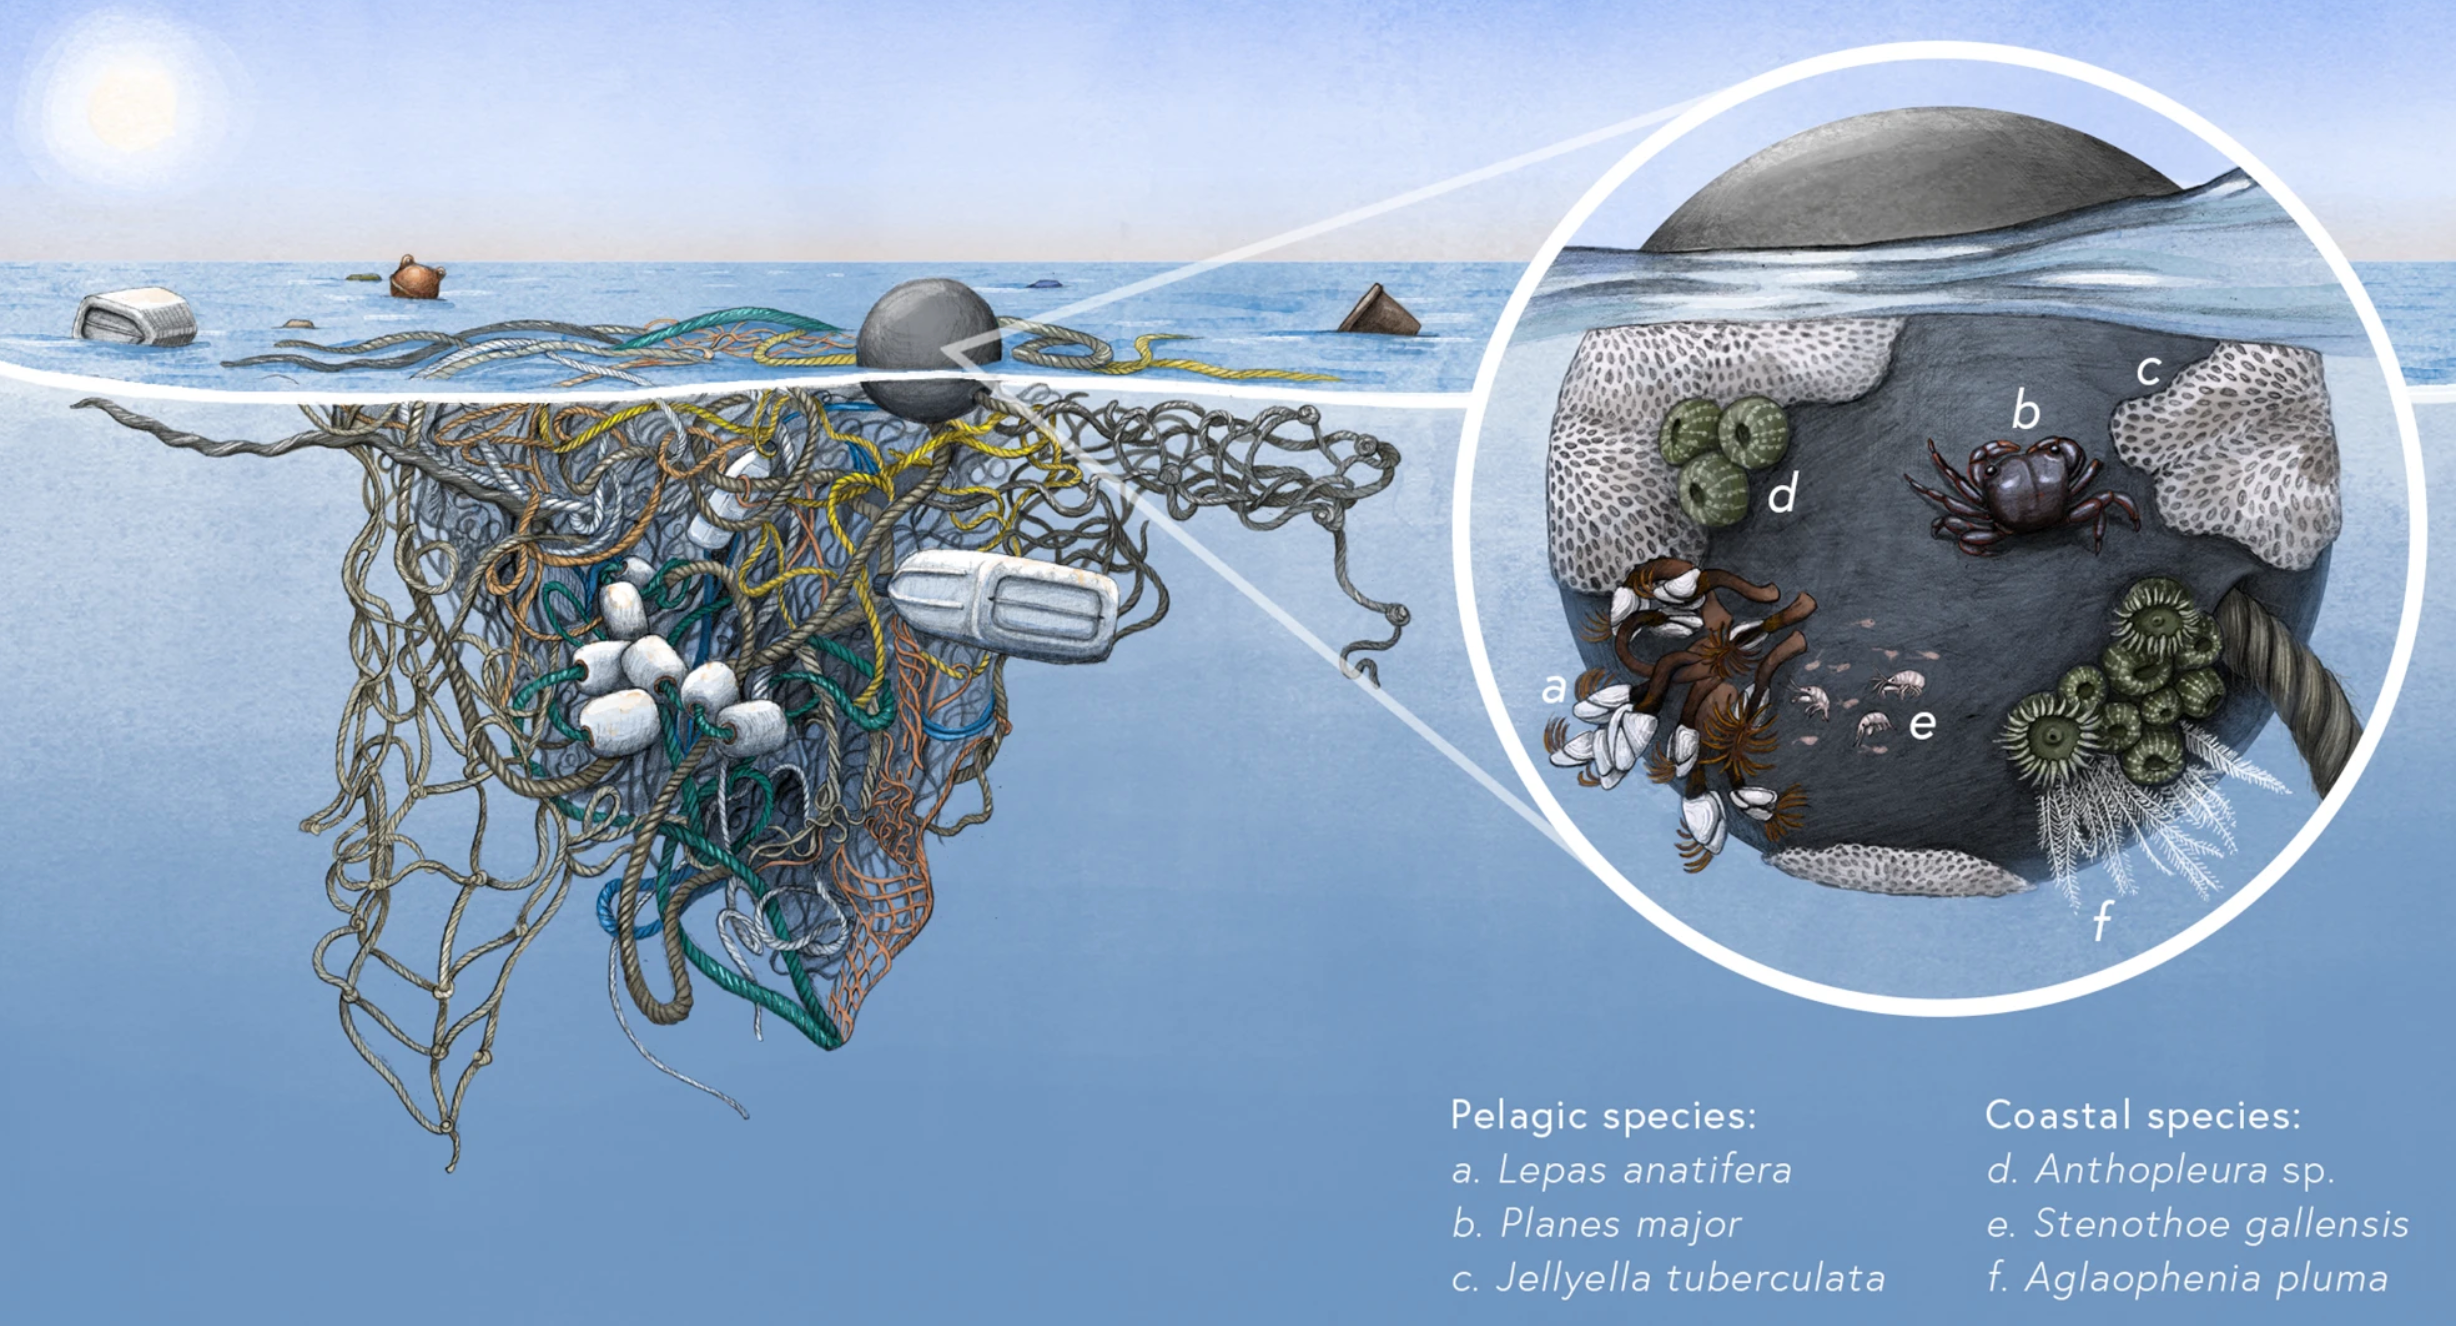 Tiny coastal species have been found living and reproducing in the Giant Pacific Garbage Patch